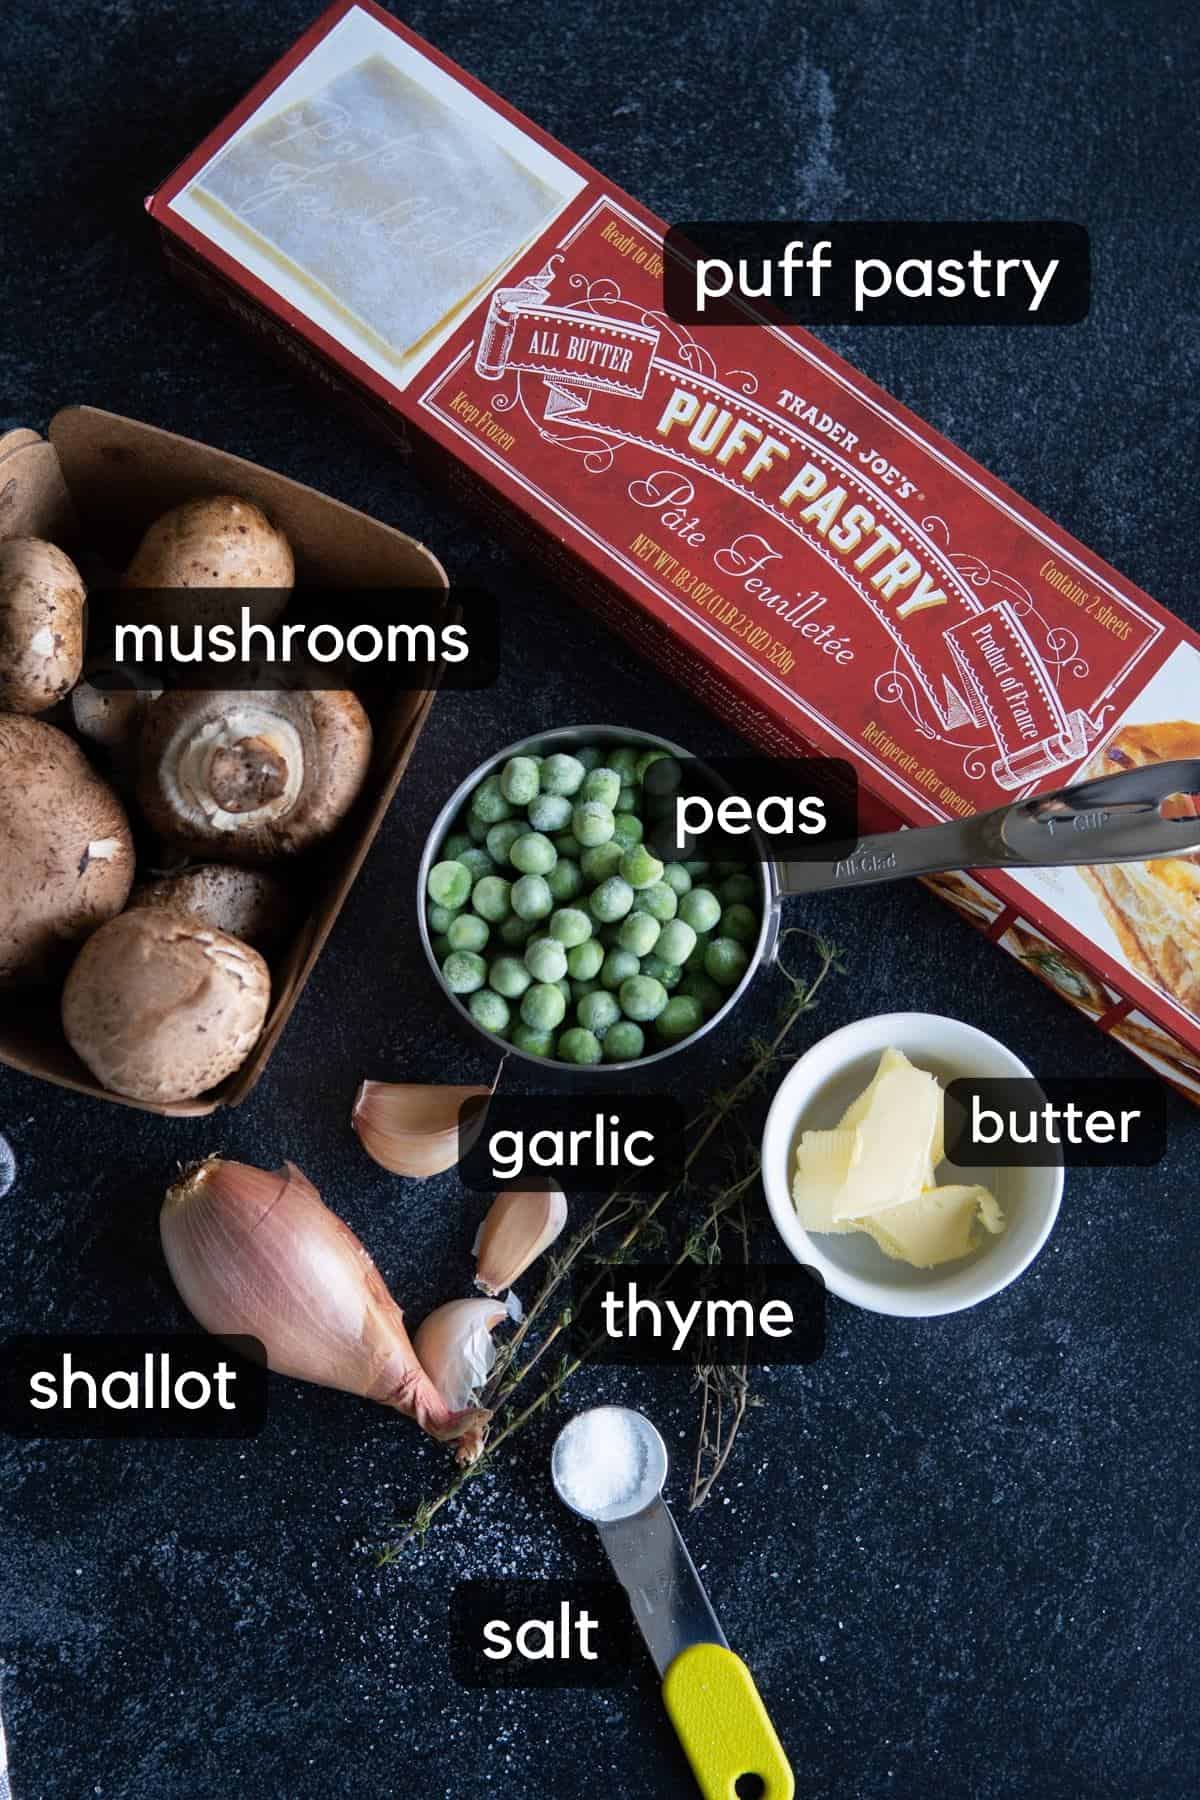 Ingredients needed to make mushroom puff pastry appetizers.